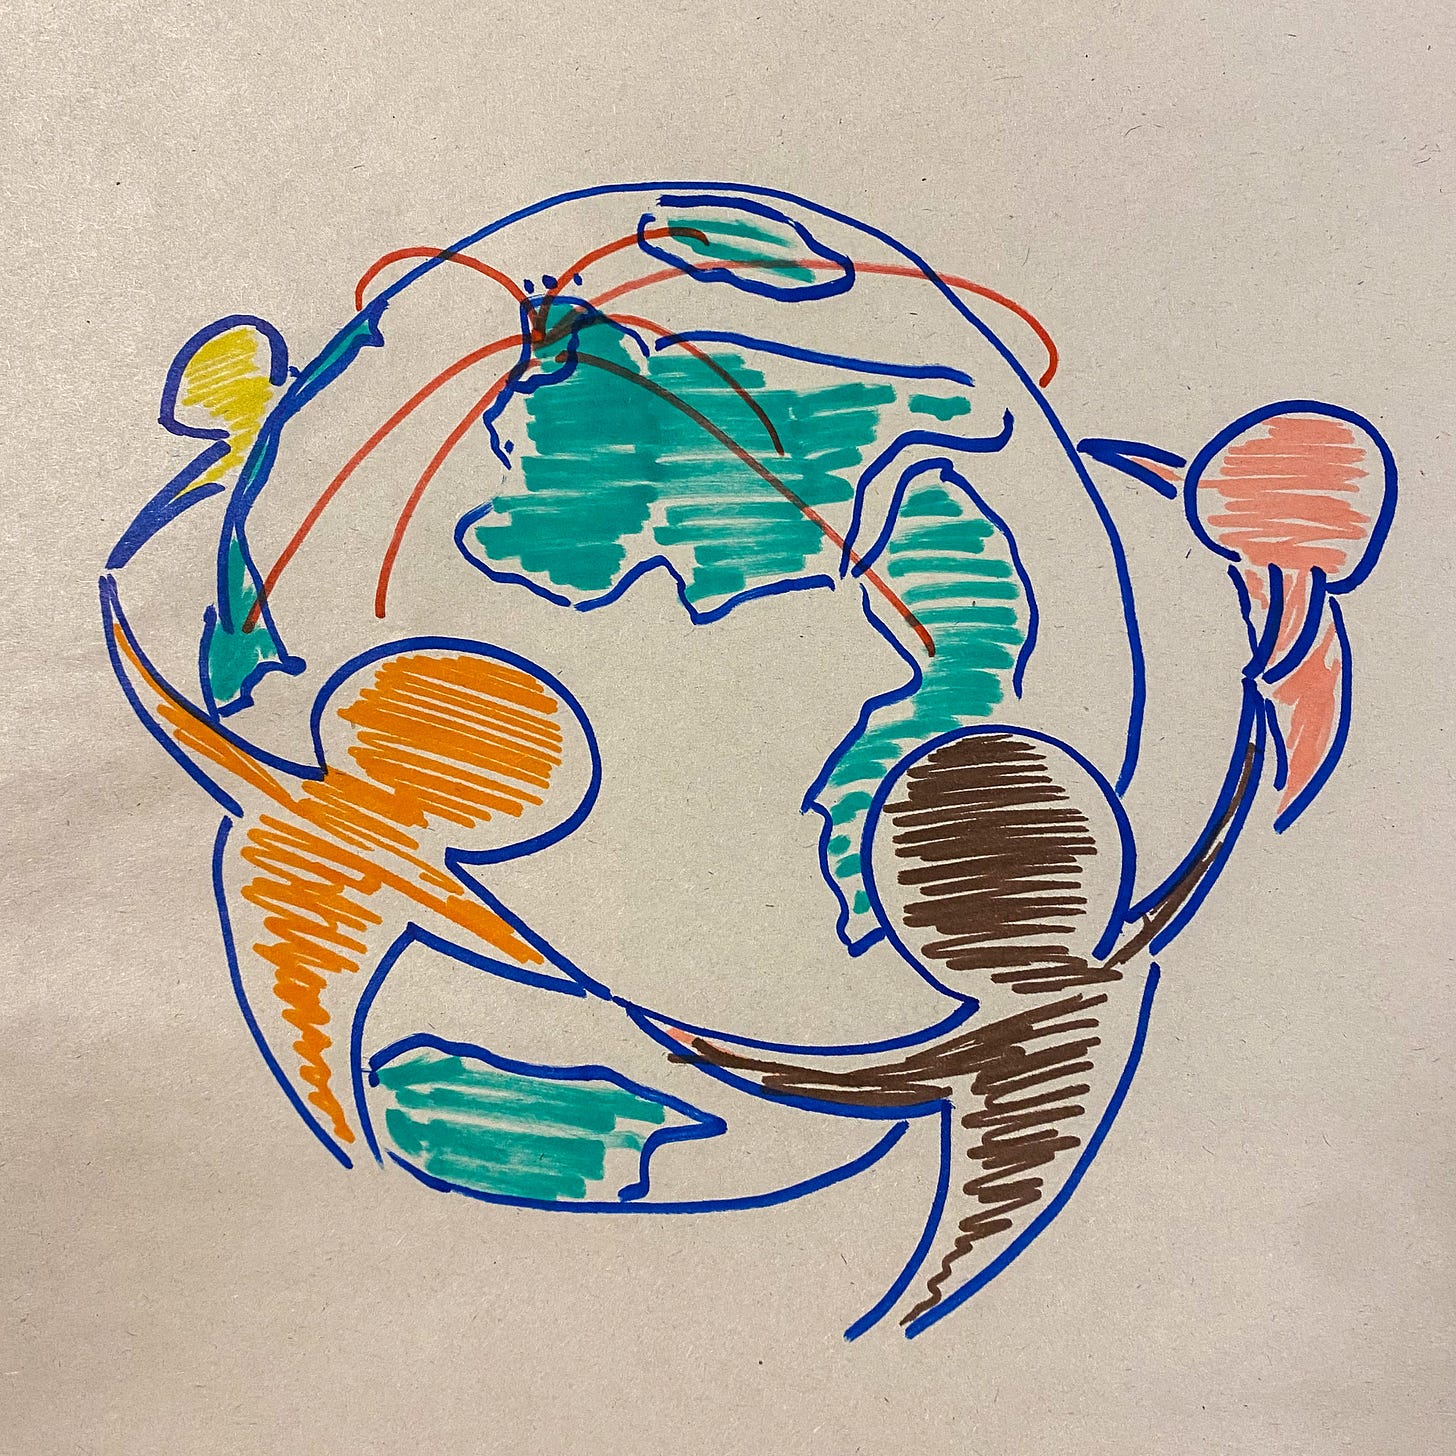 A hand-drawn image of the world with people holding hands around it